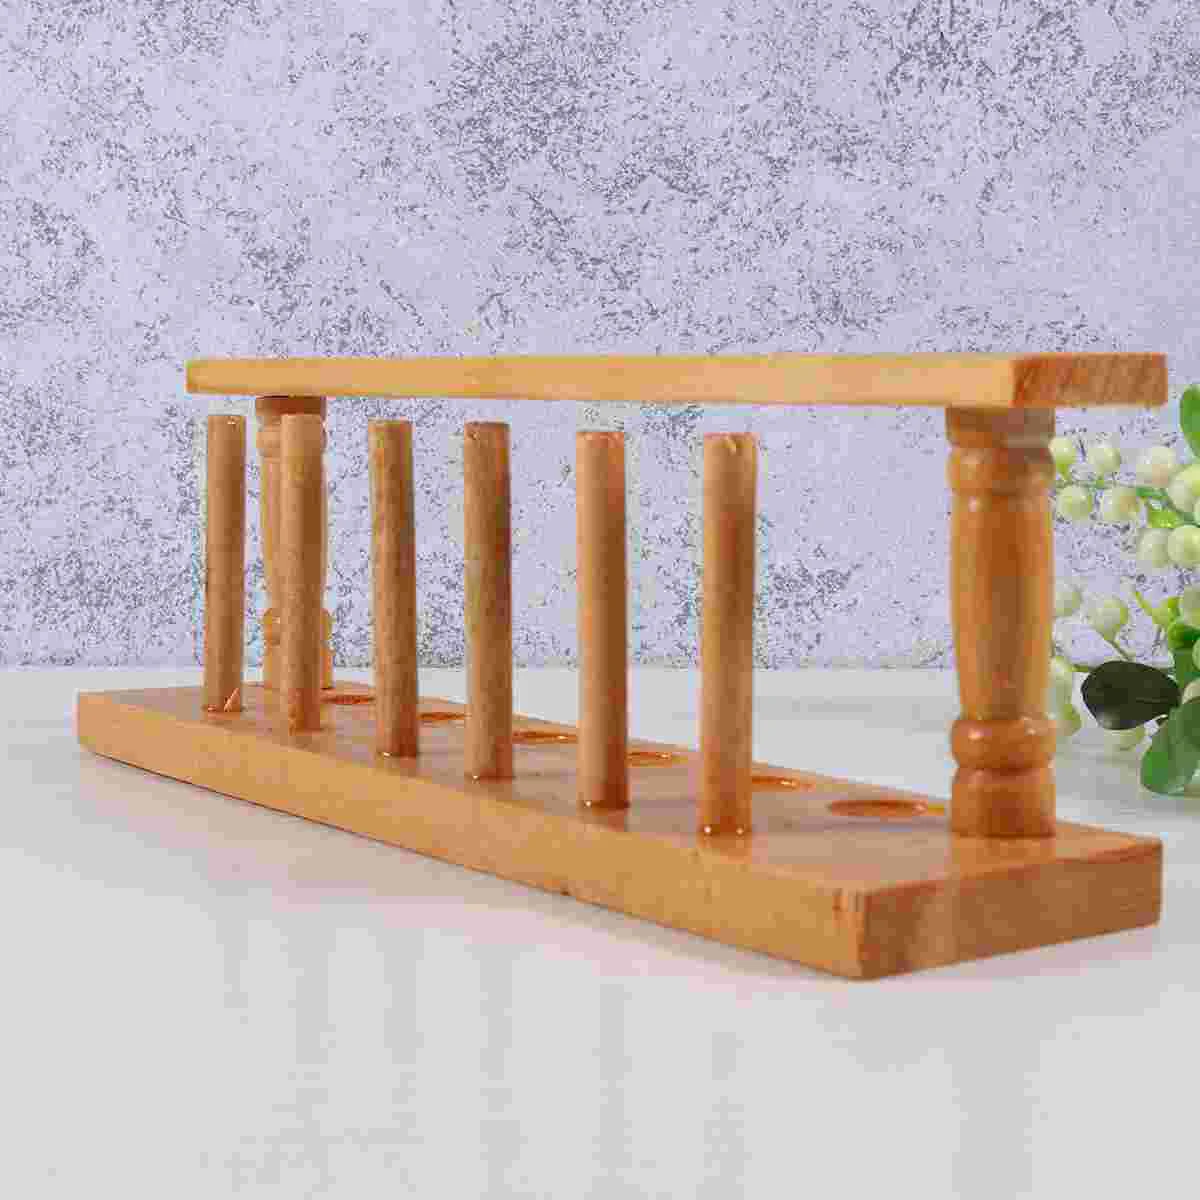 

Wooden 6 Vents Test Tube Rack Holder Stand School Laboratory Supplies